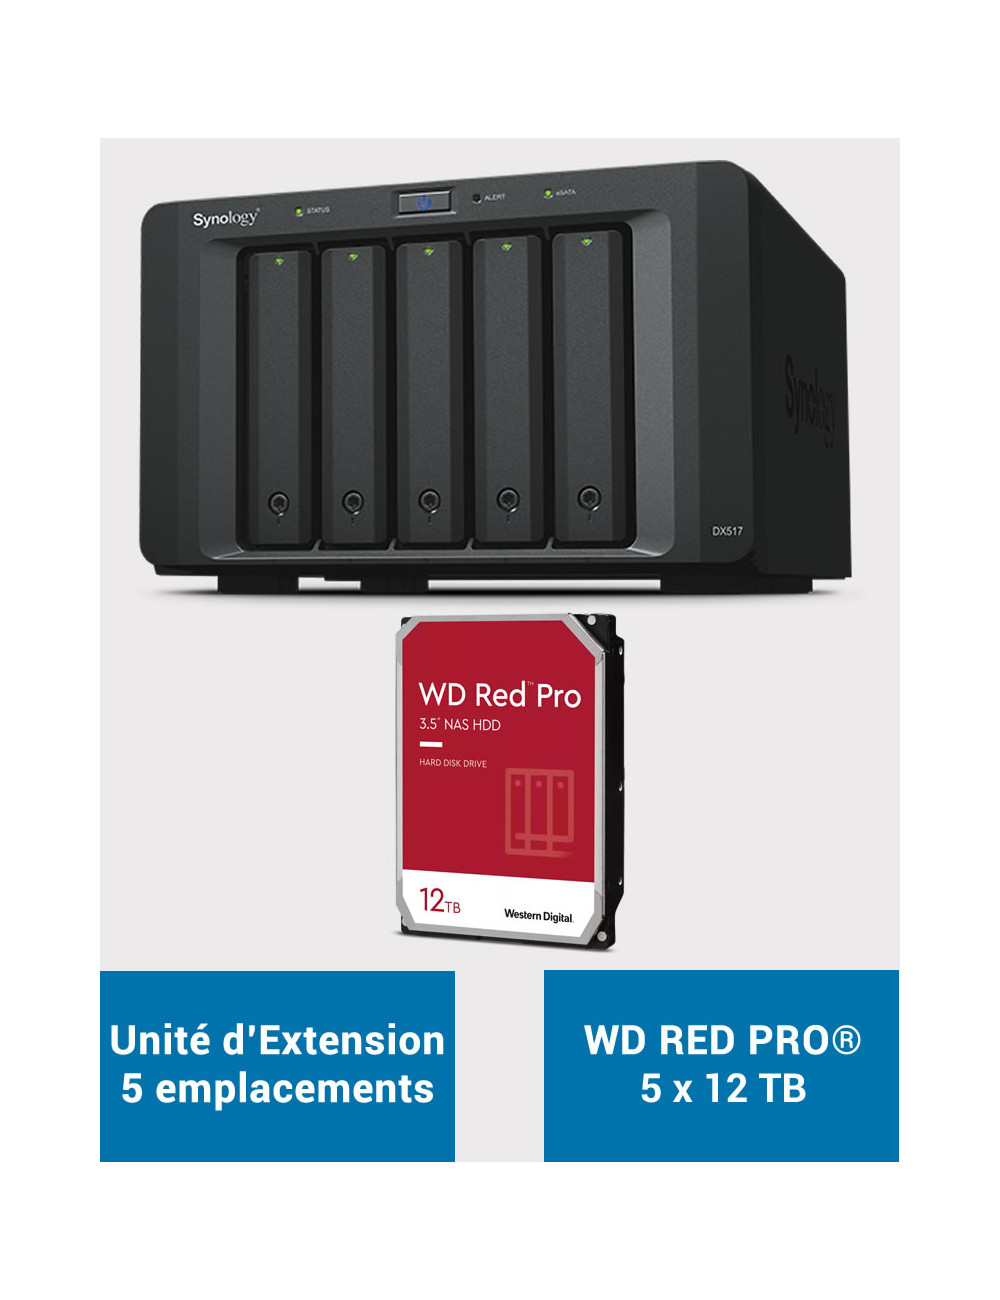 Synology DX517 Expansion Unit WD RED PRO 60TB (5x12TB)